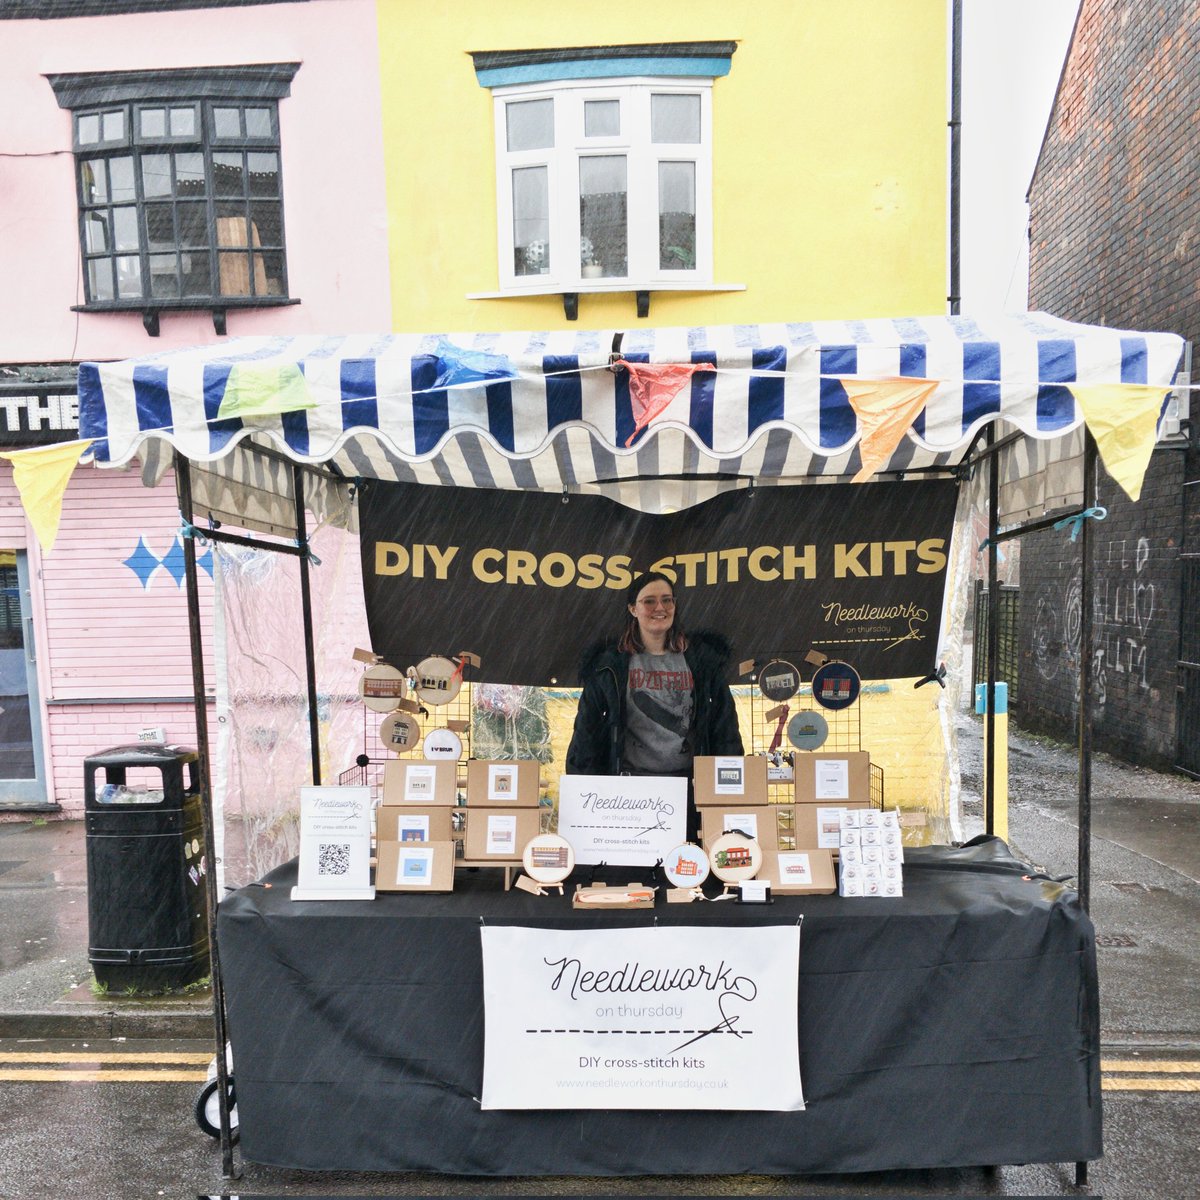 The next market I'll be at in April is #kingsheathartisanmarket next Sunday, last time I saw a dog in a yellow mac and it was delightful. 😊 #brumhour